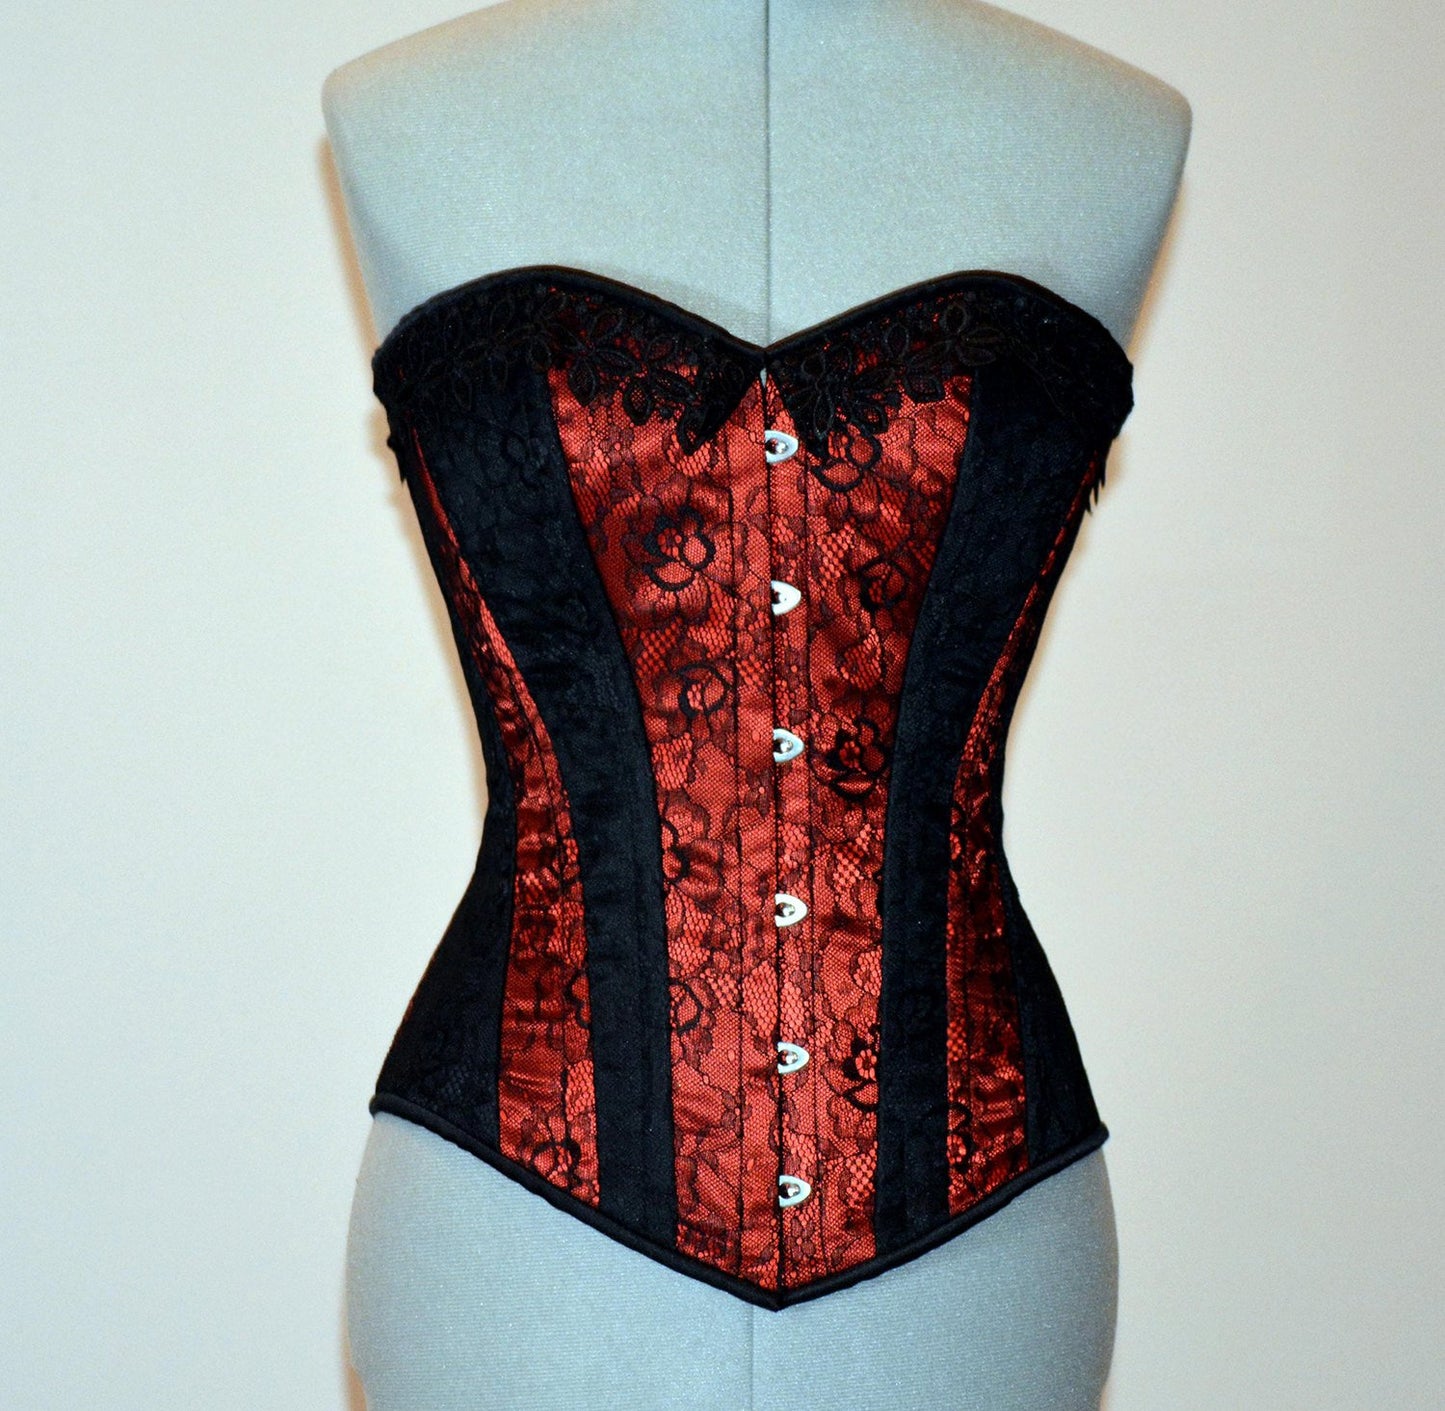 Authentic steel-boned corsets for tight lacing and waist training